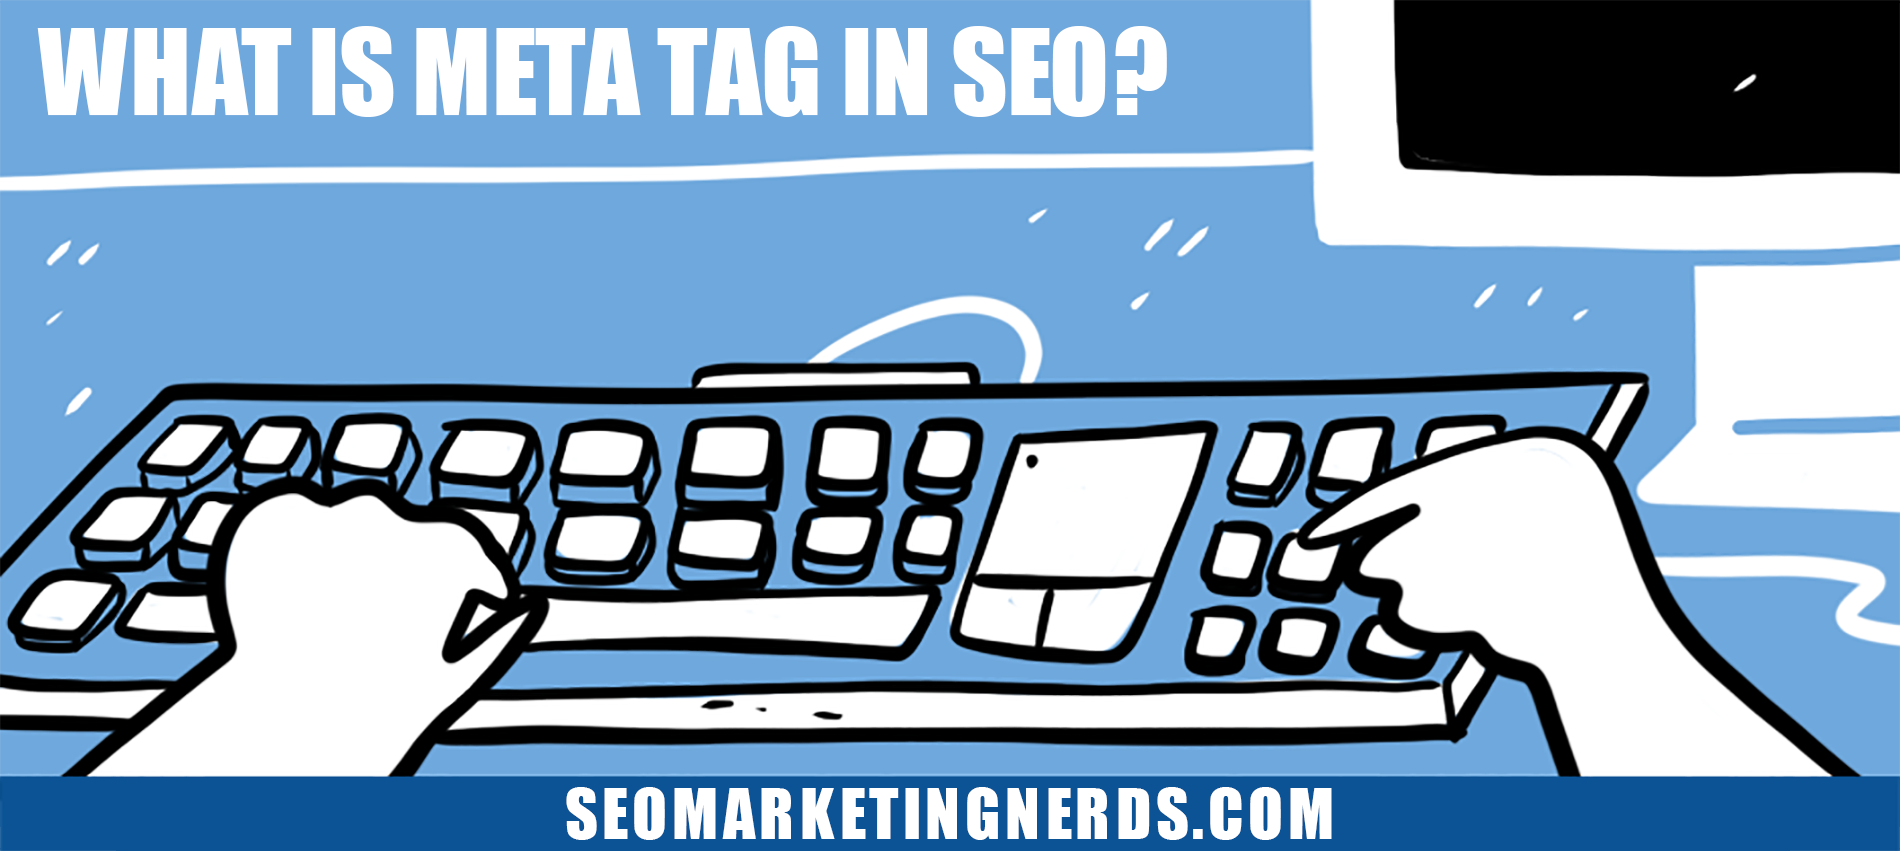 What Is Meta Tag In SEO?